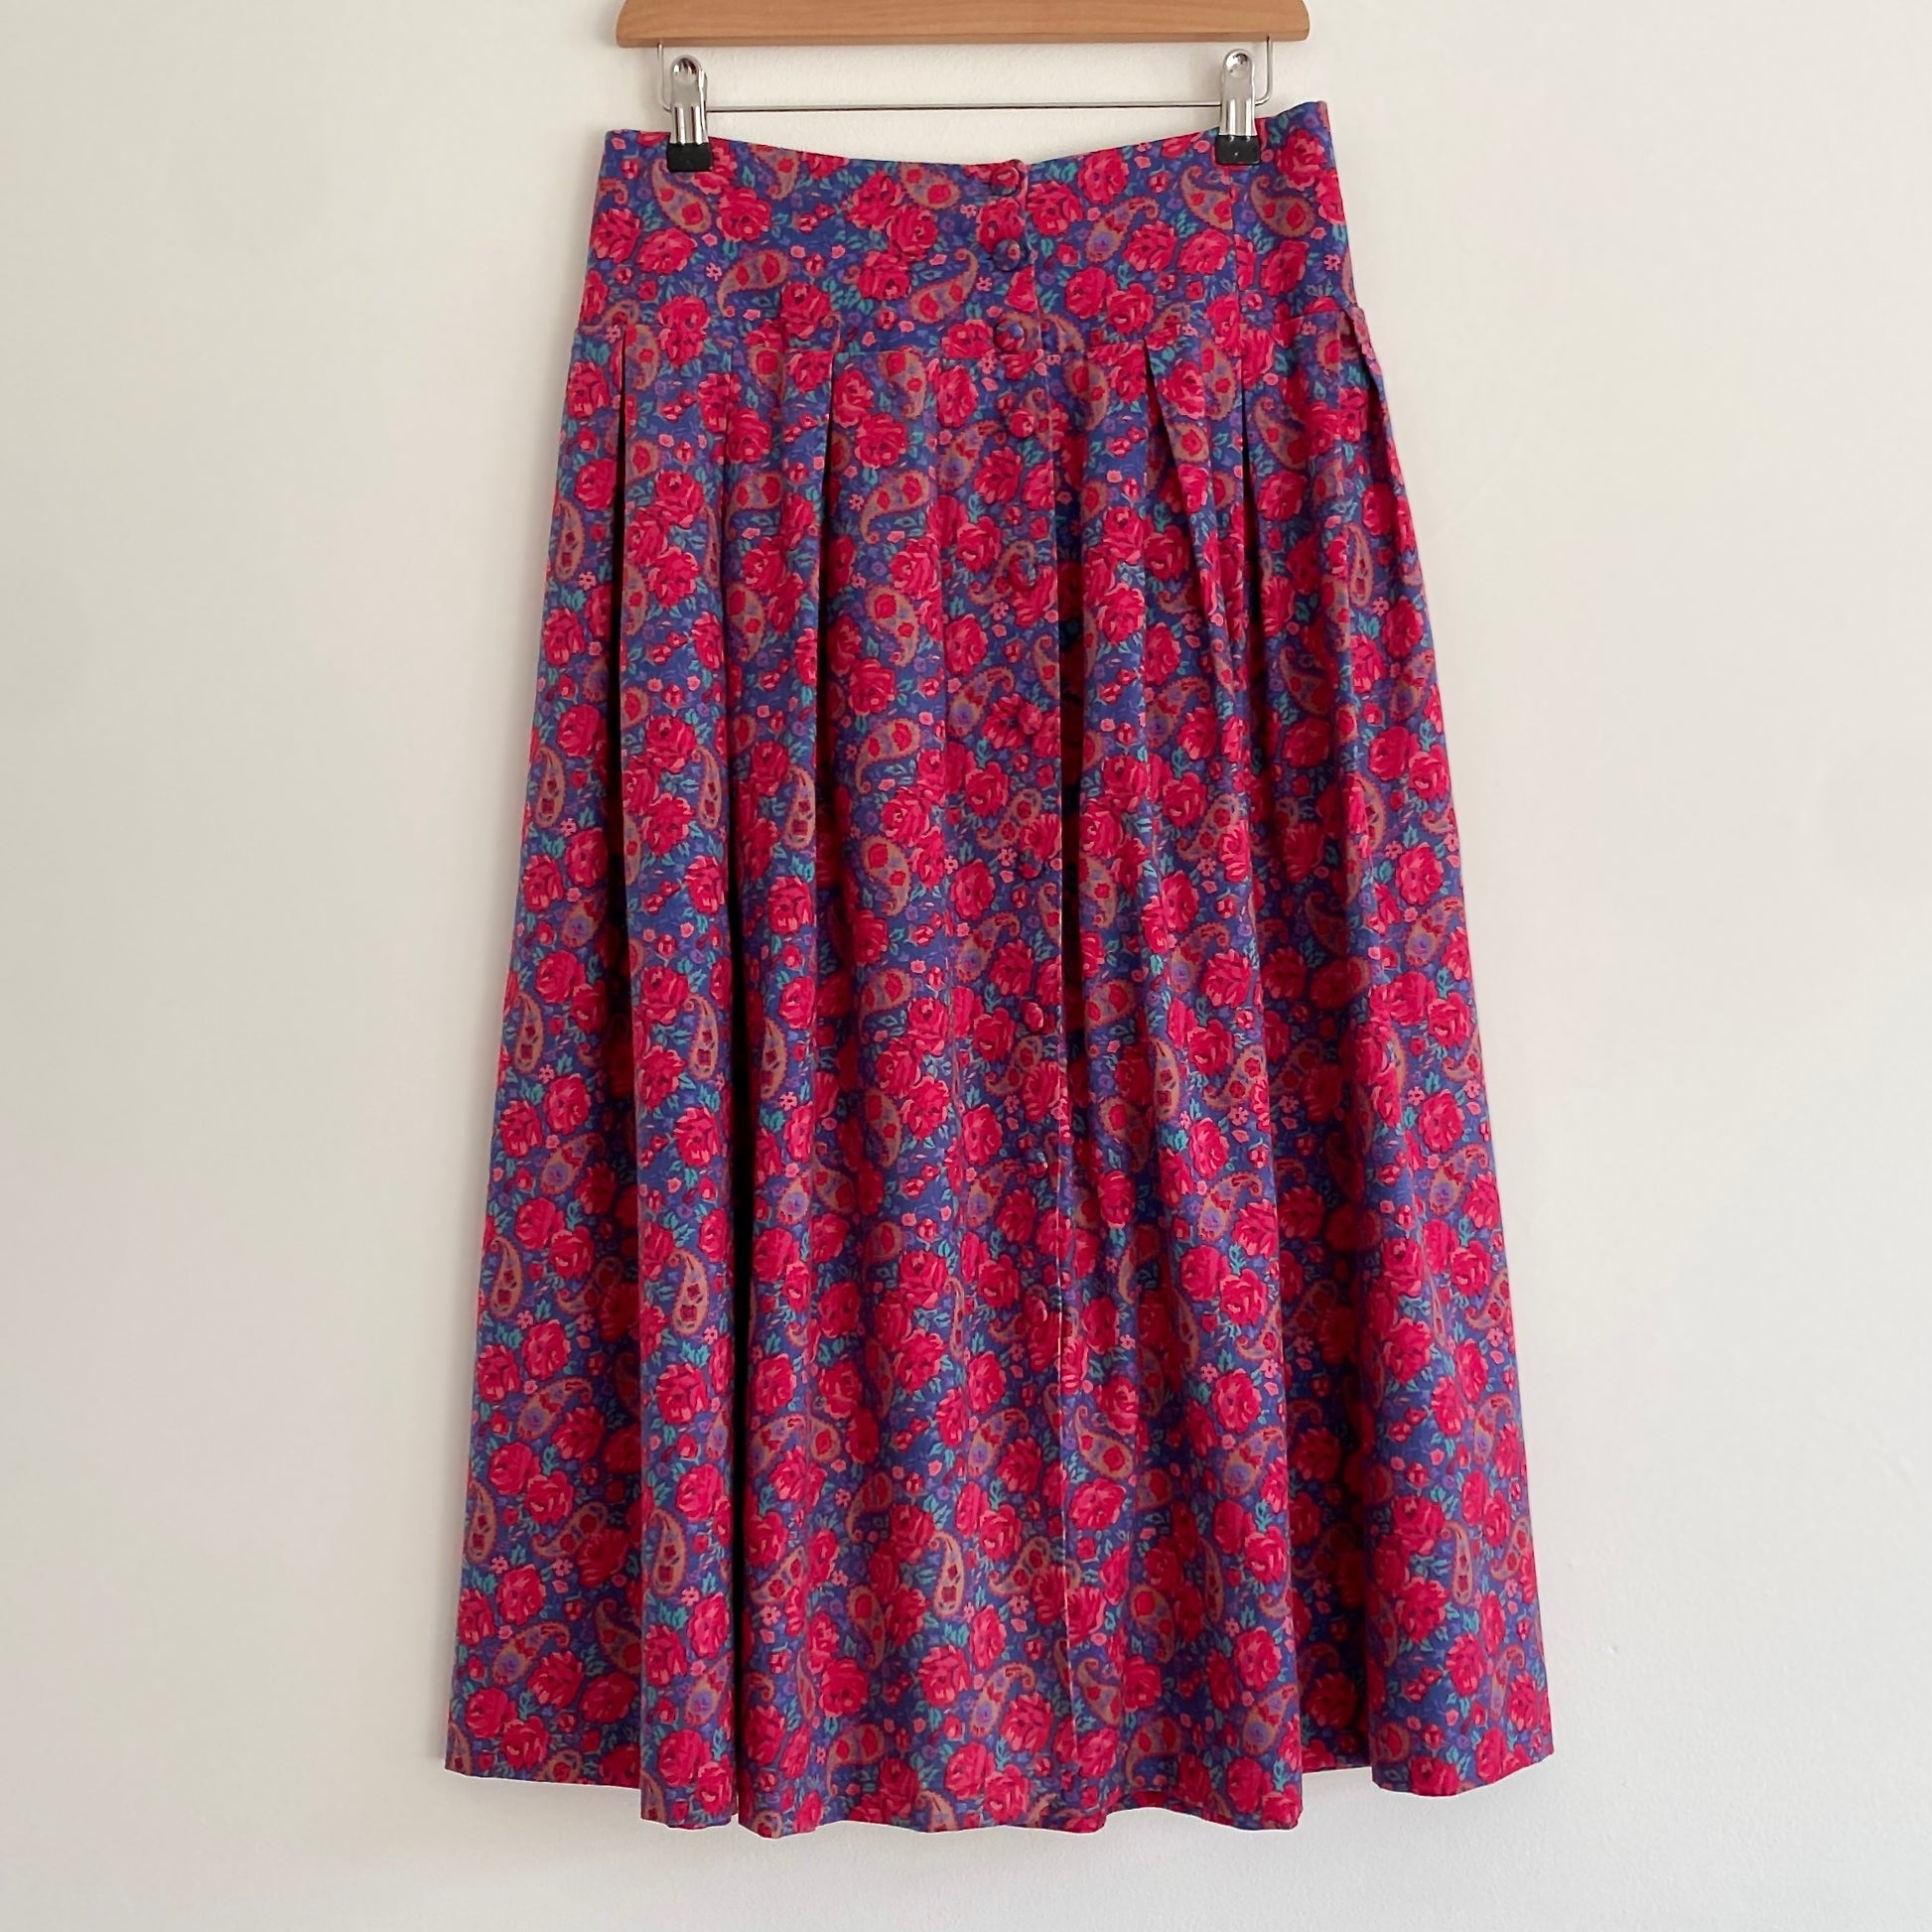 Vintage 80s/90s ﻿blue and red toned full skirt By Laura Ashley Paisley pattern Deep waistband Button front fastening  Box pleats to front and back 100% Cotton